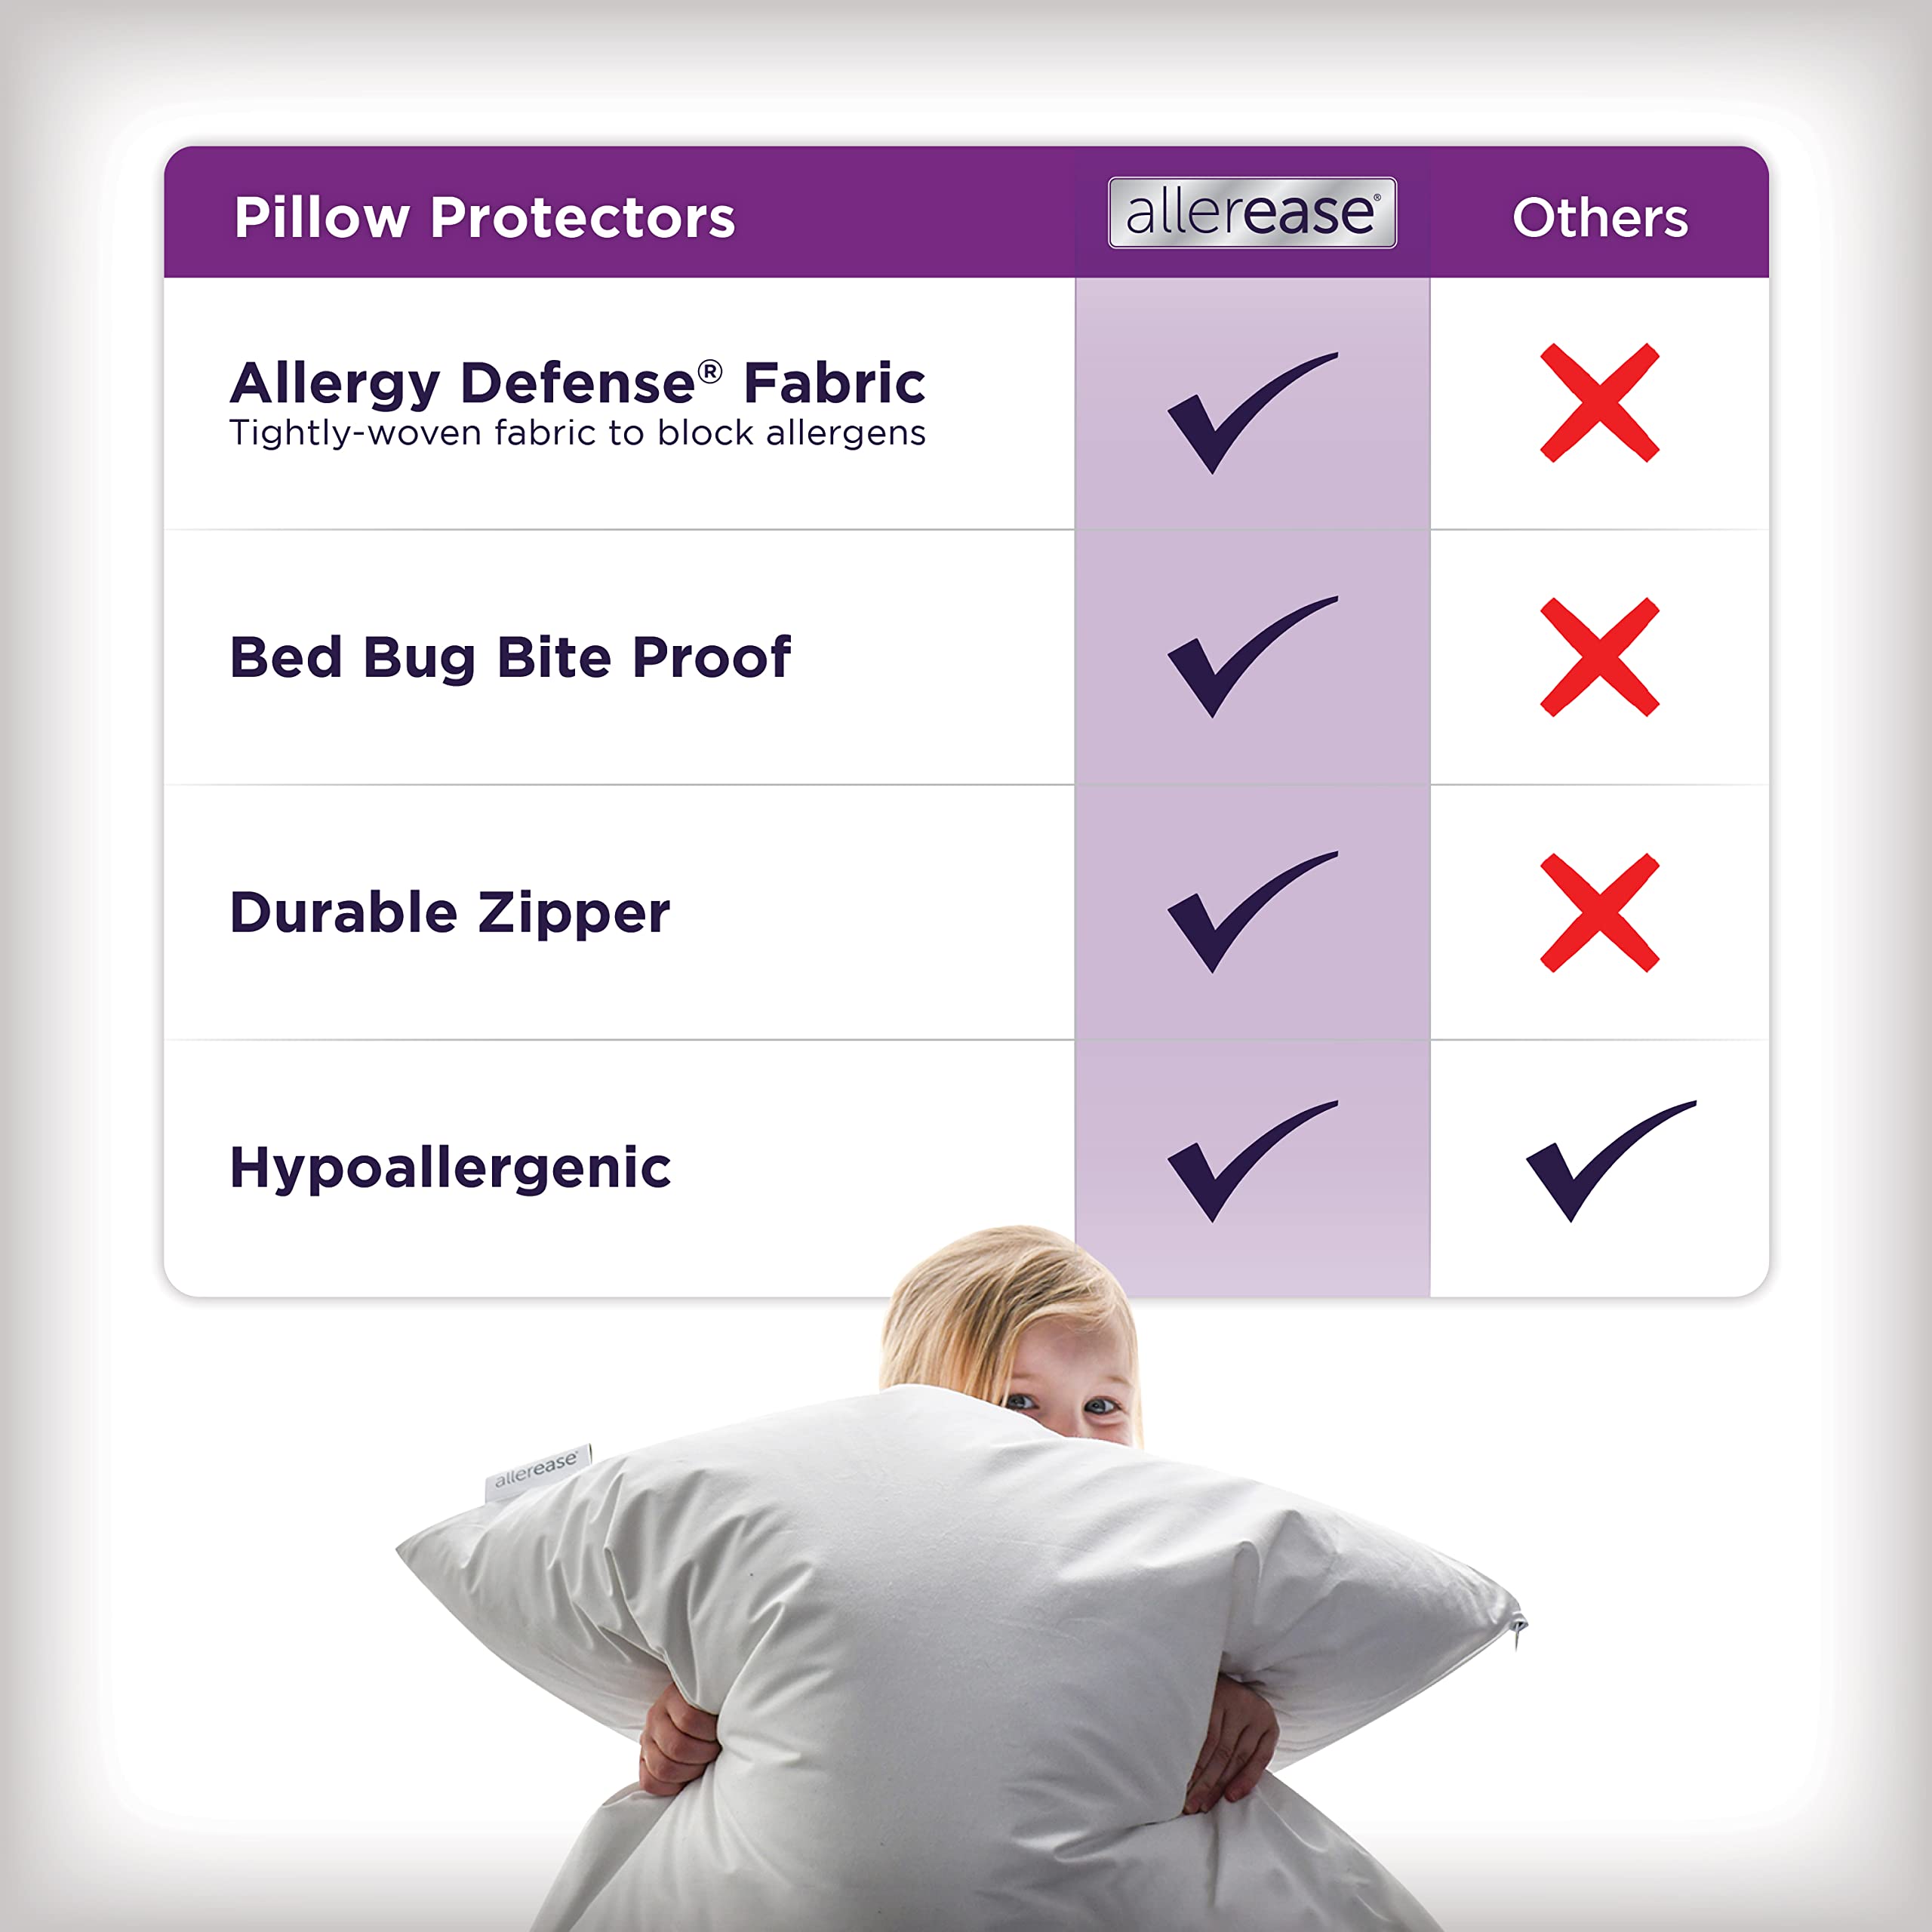 Aller-Ease AllerEase Breathable, Zippered Pillow Protector, King